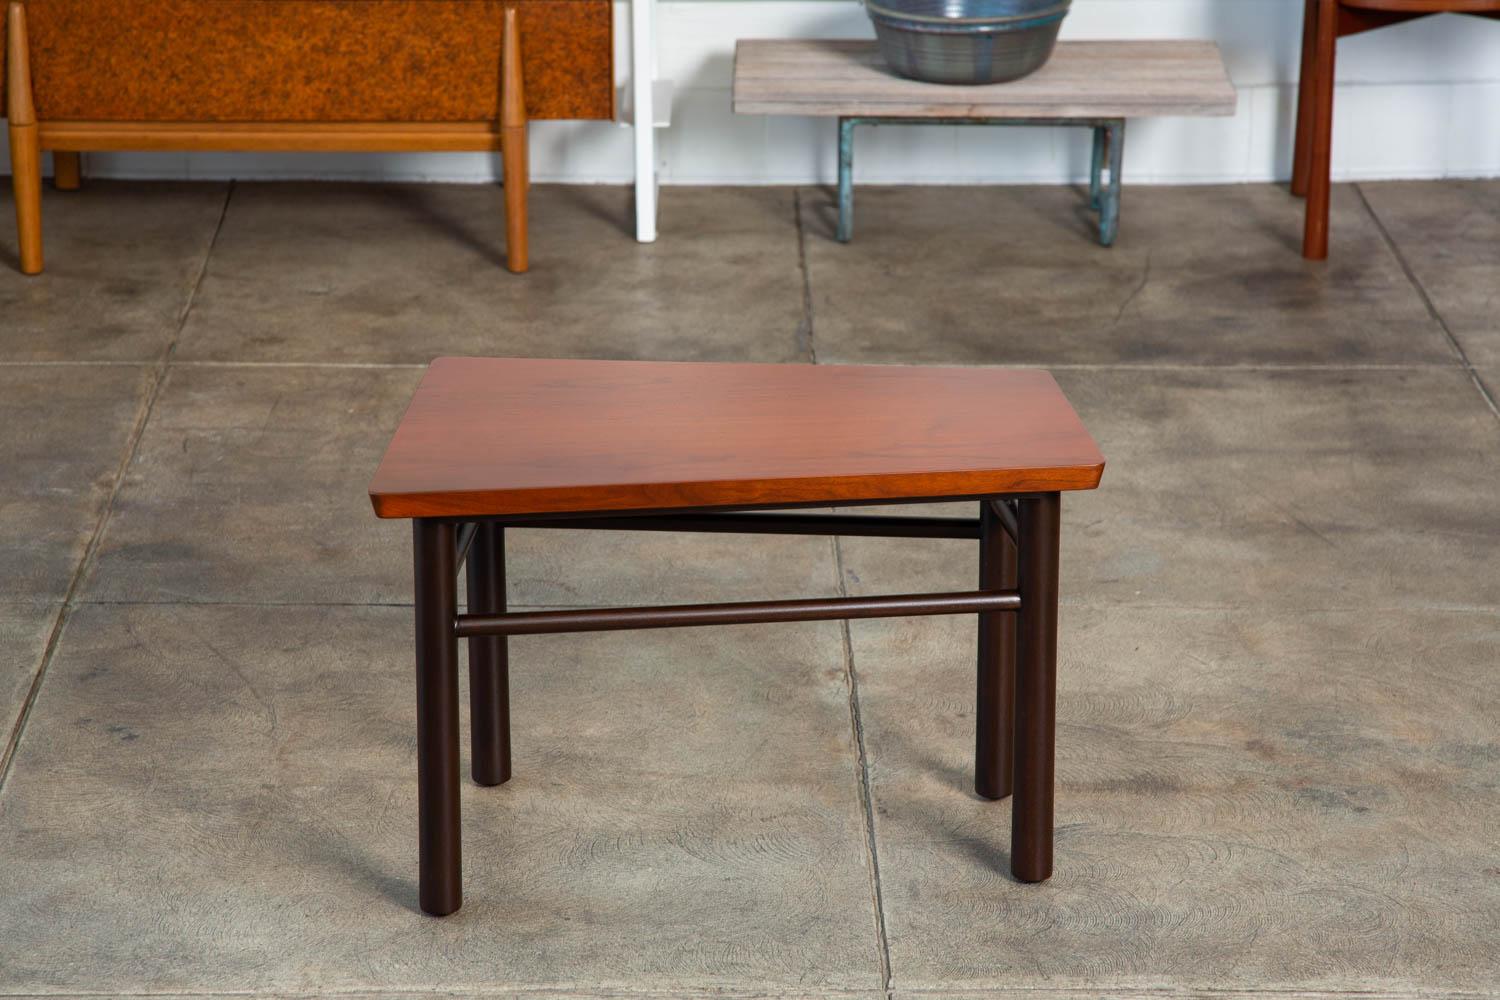 A wedge shaped side table by Edward Wormley for Dunbar. This end table features a trapezoidal walnut top, which sits atop dark contrasting mahogany legs with angled horizontal stretchers. Retains original [ Dunbar - Berne, Indiana] metal label on